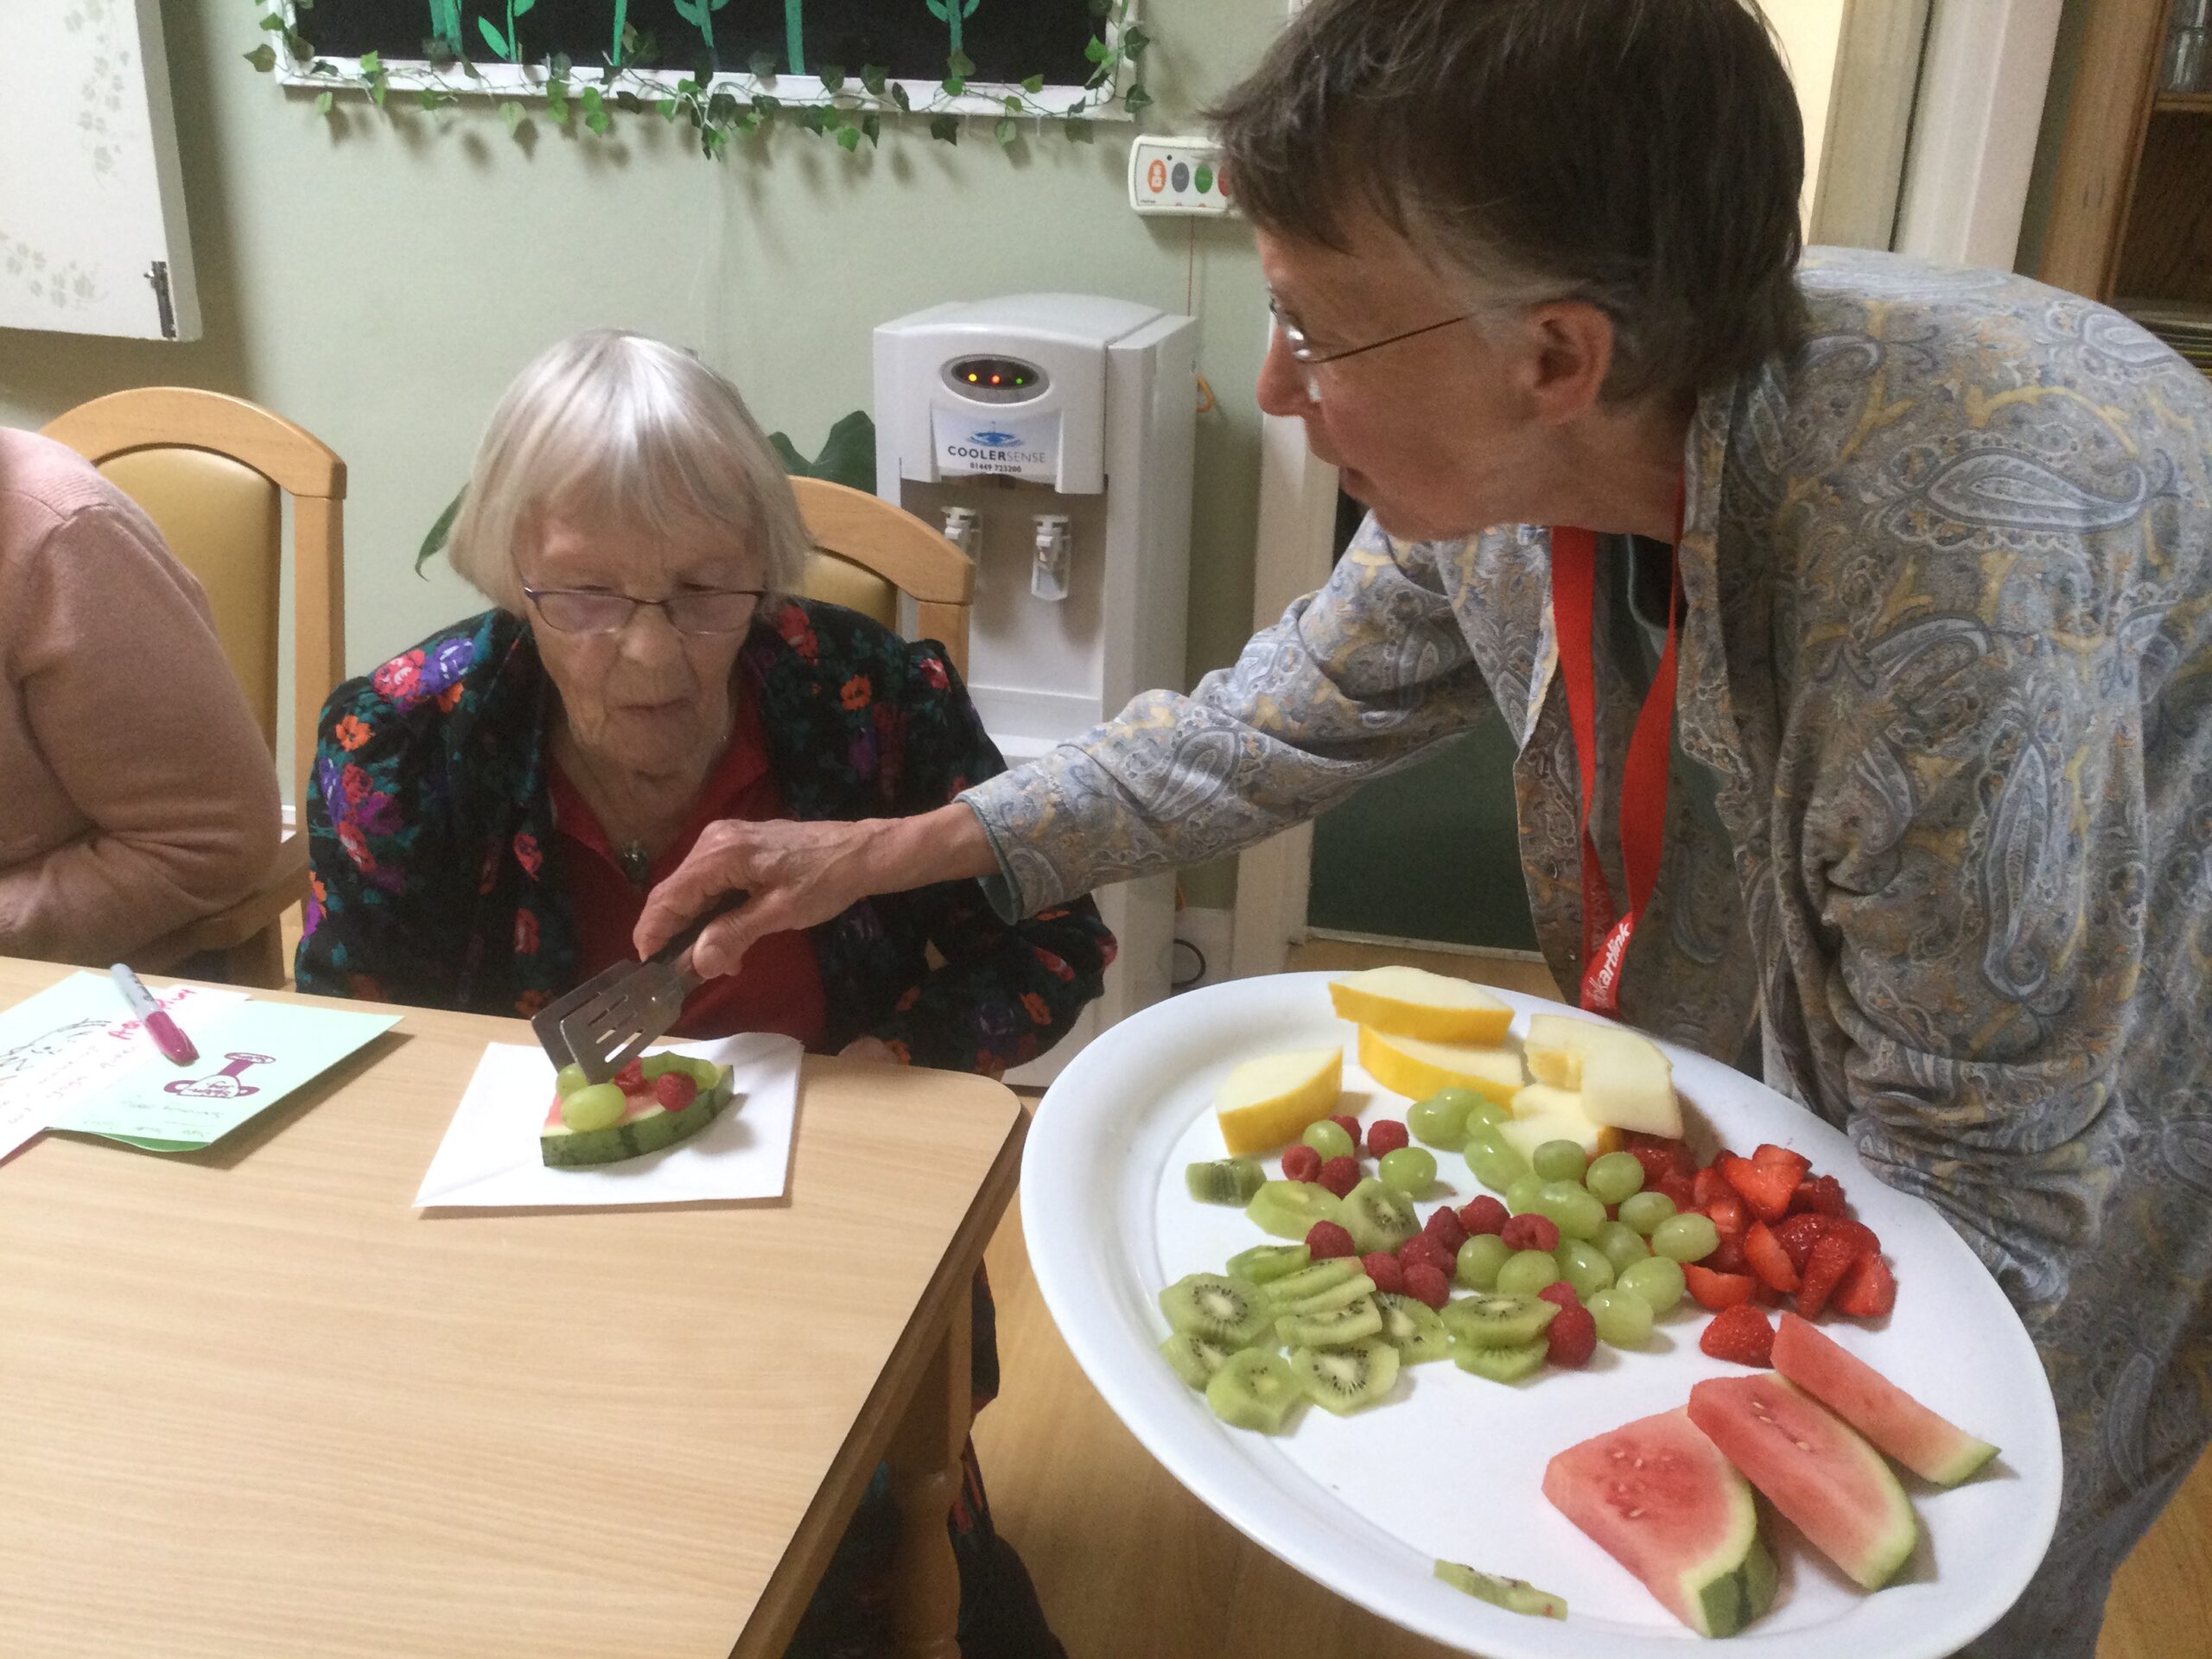 A person with a large white platter with sliced watermelon, honeydew melon, grapes, kiwi, strawberries and raspberries, serving some fruit to a resident